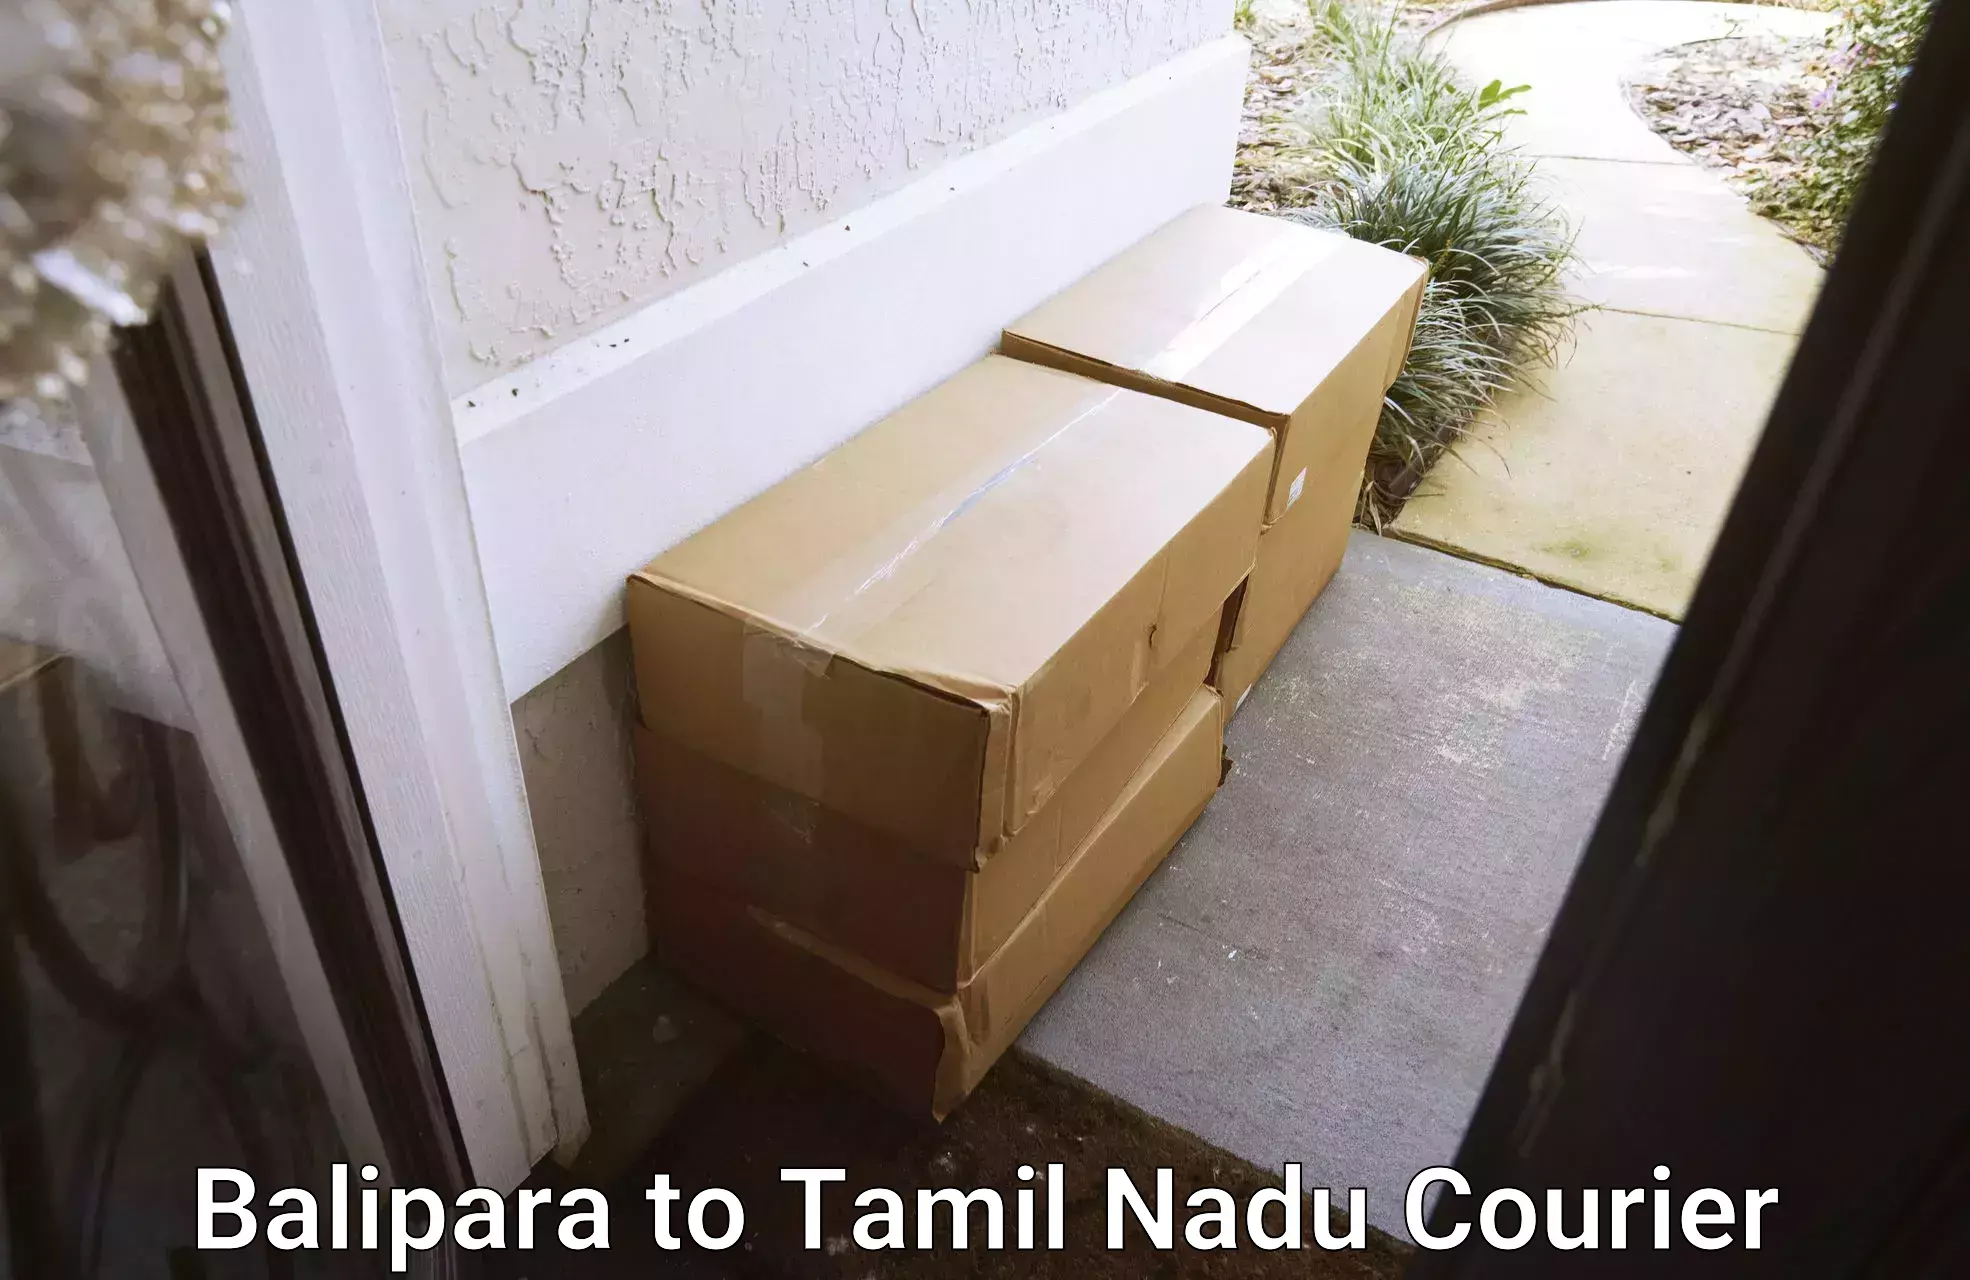 24-hour courier services Balipara to Tamil Nadu